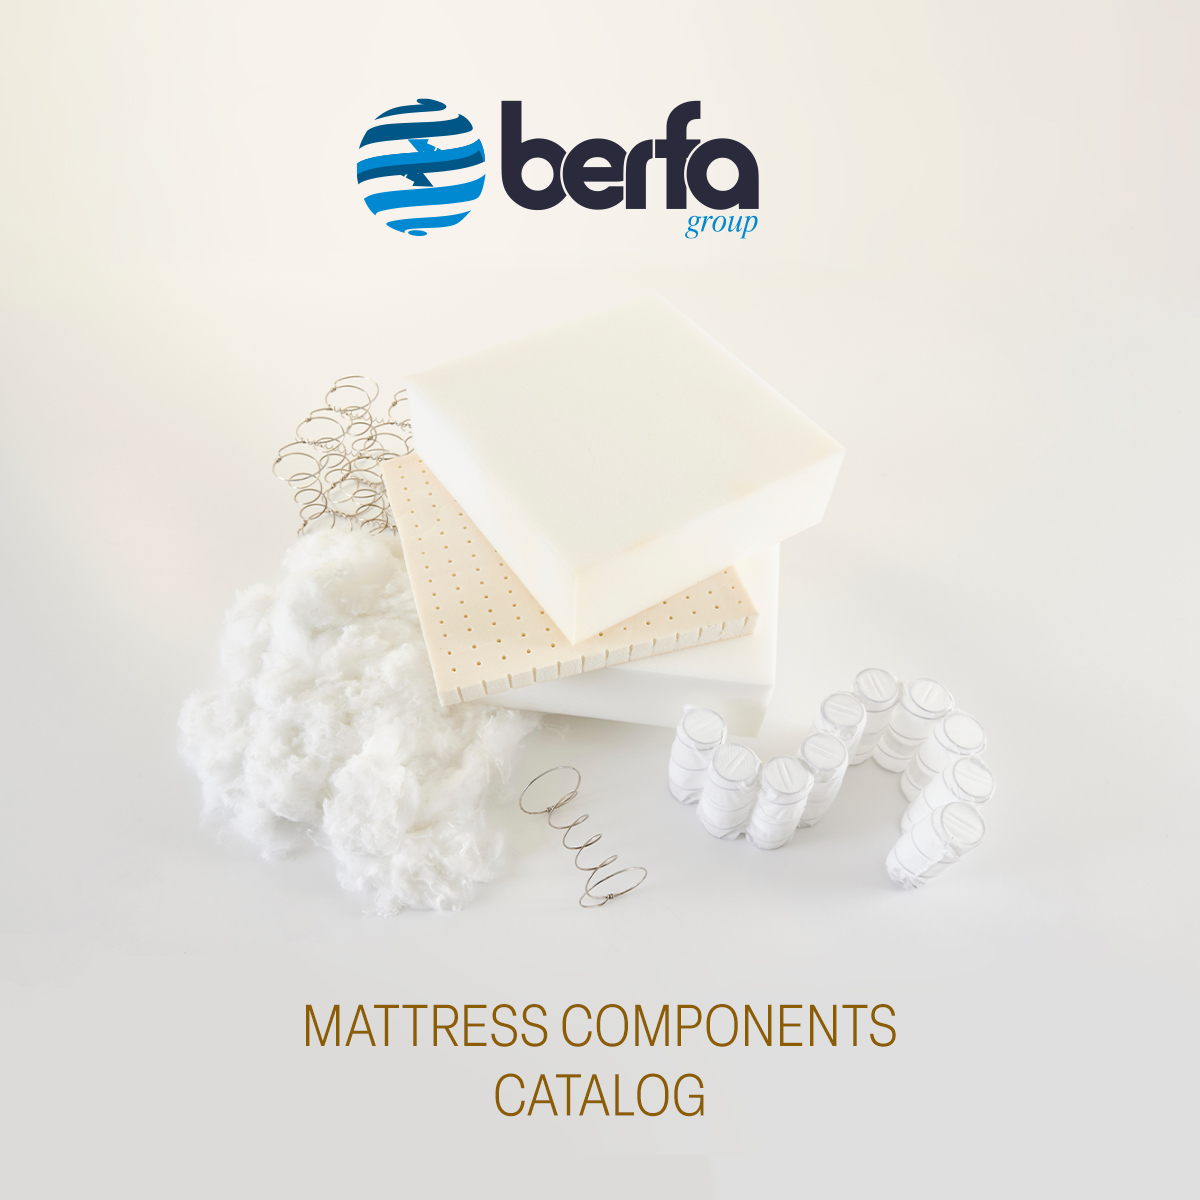 Mattress Components and Accessories Catalog